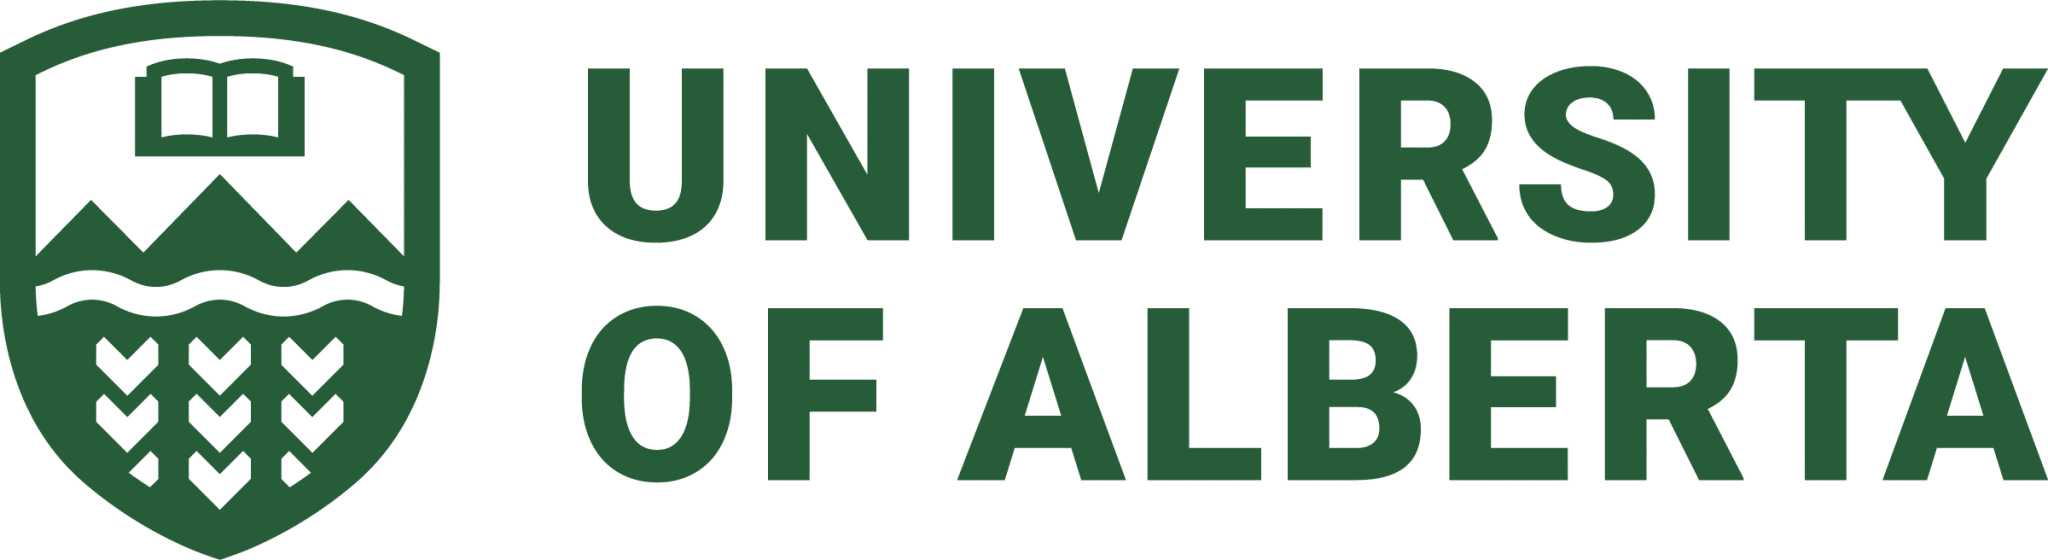 The University of Alberta logo displayed on a green background.